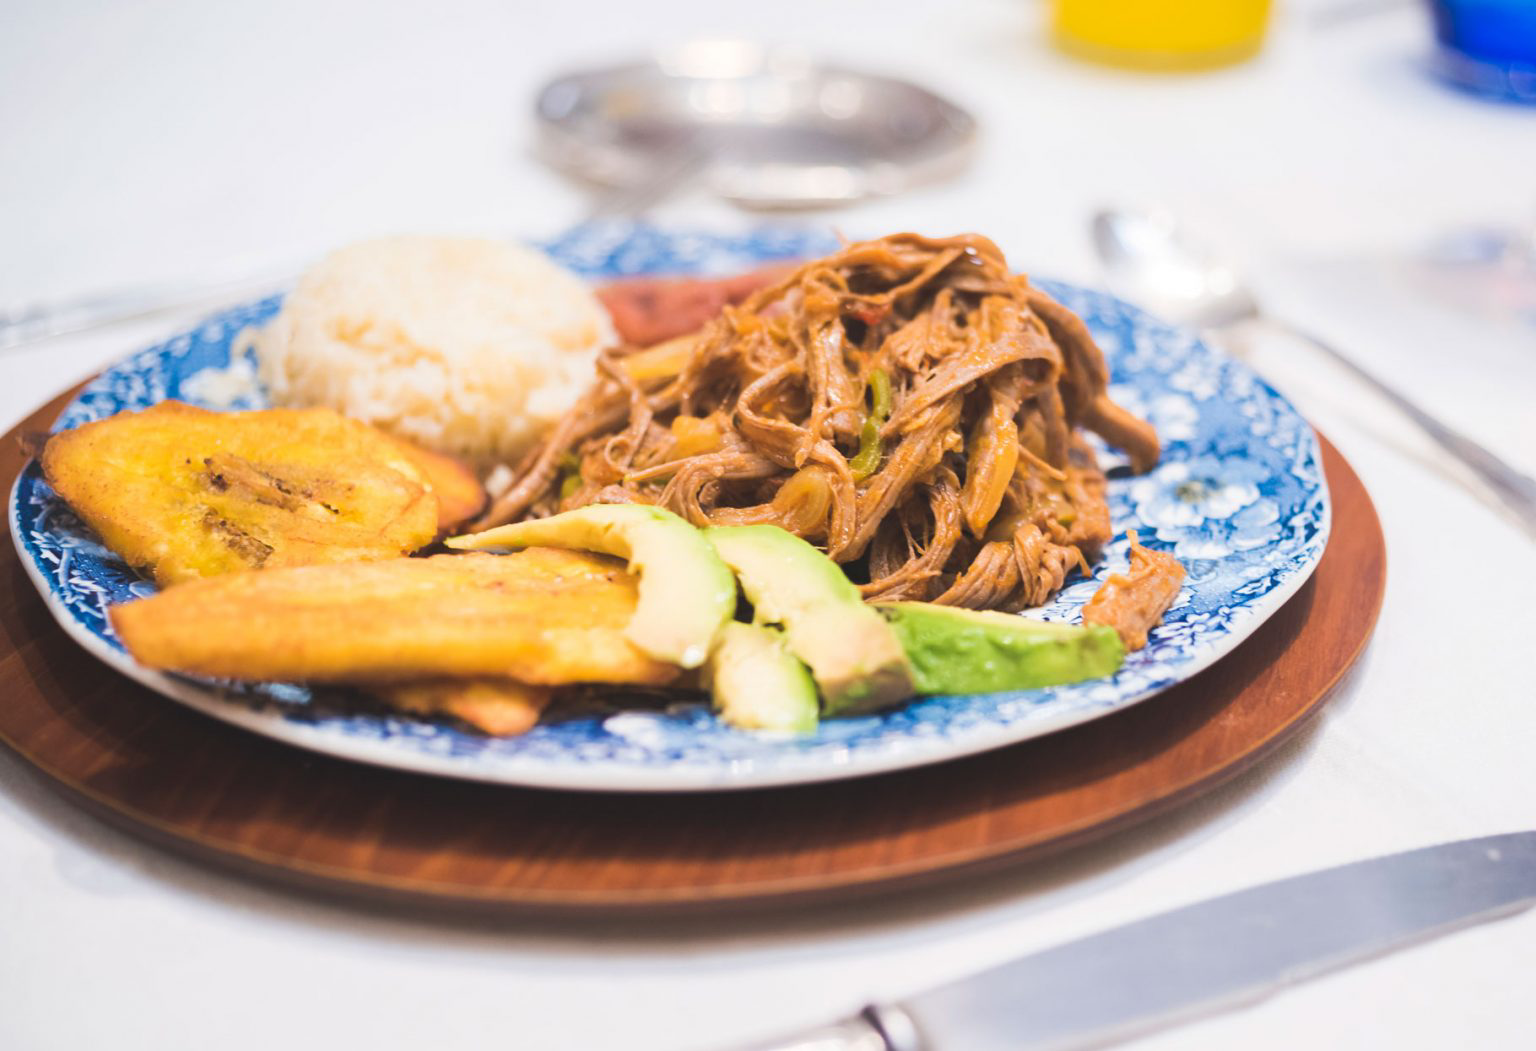 A full plate of ropa vieja, a popular Caribbean dish.